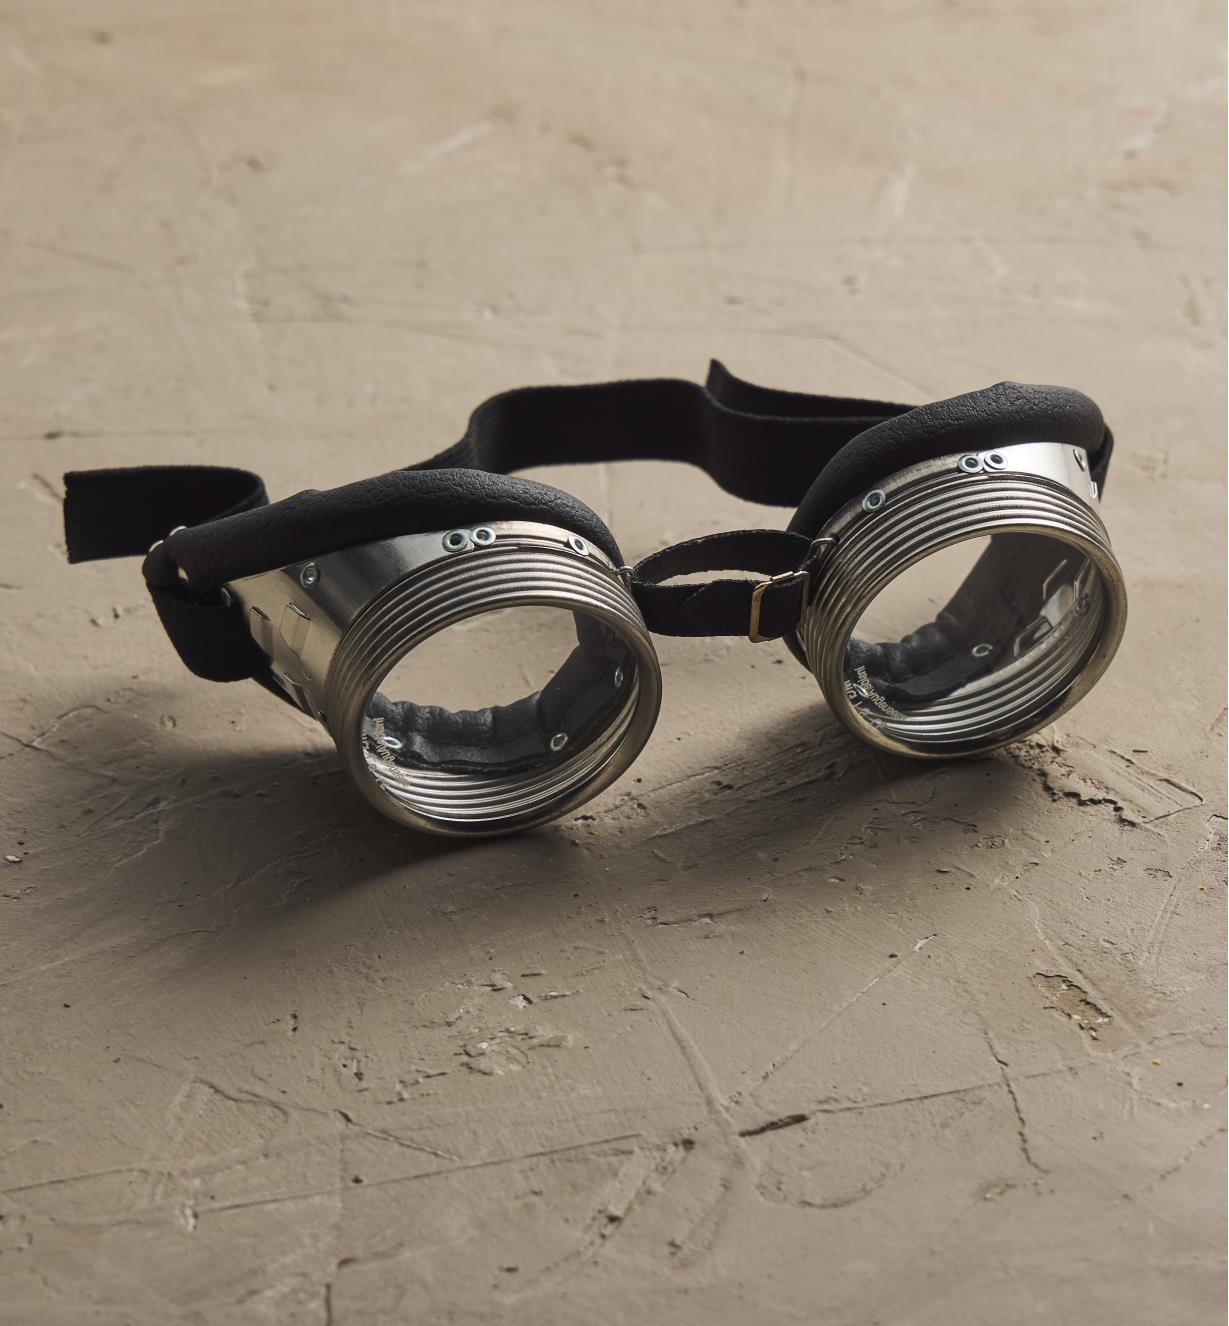 22R7350 - German Safety Goggles